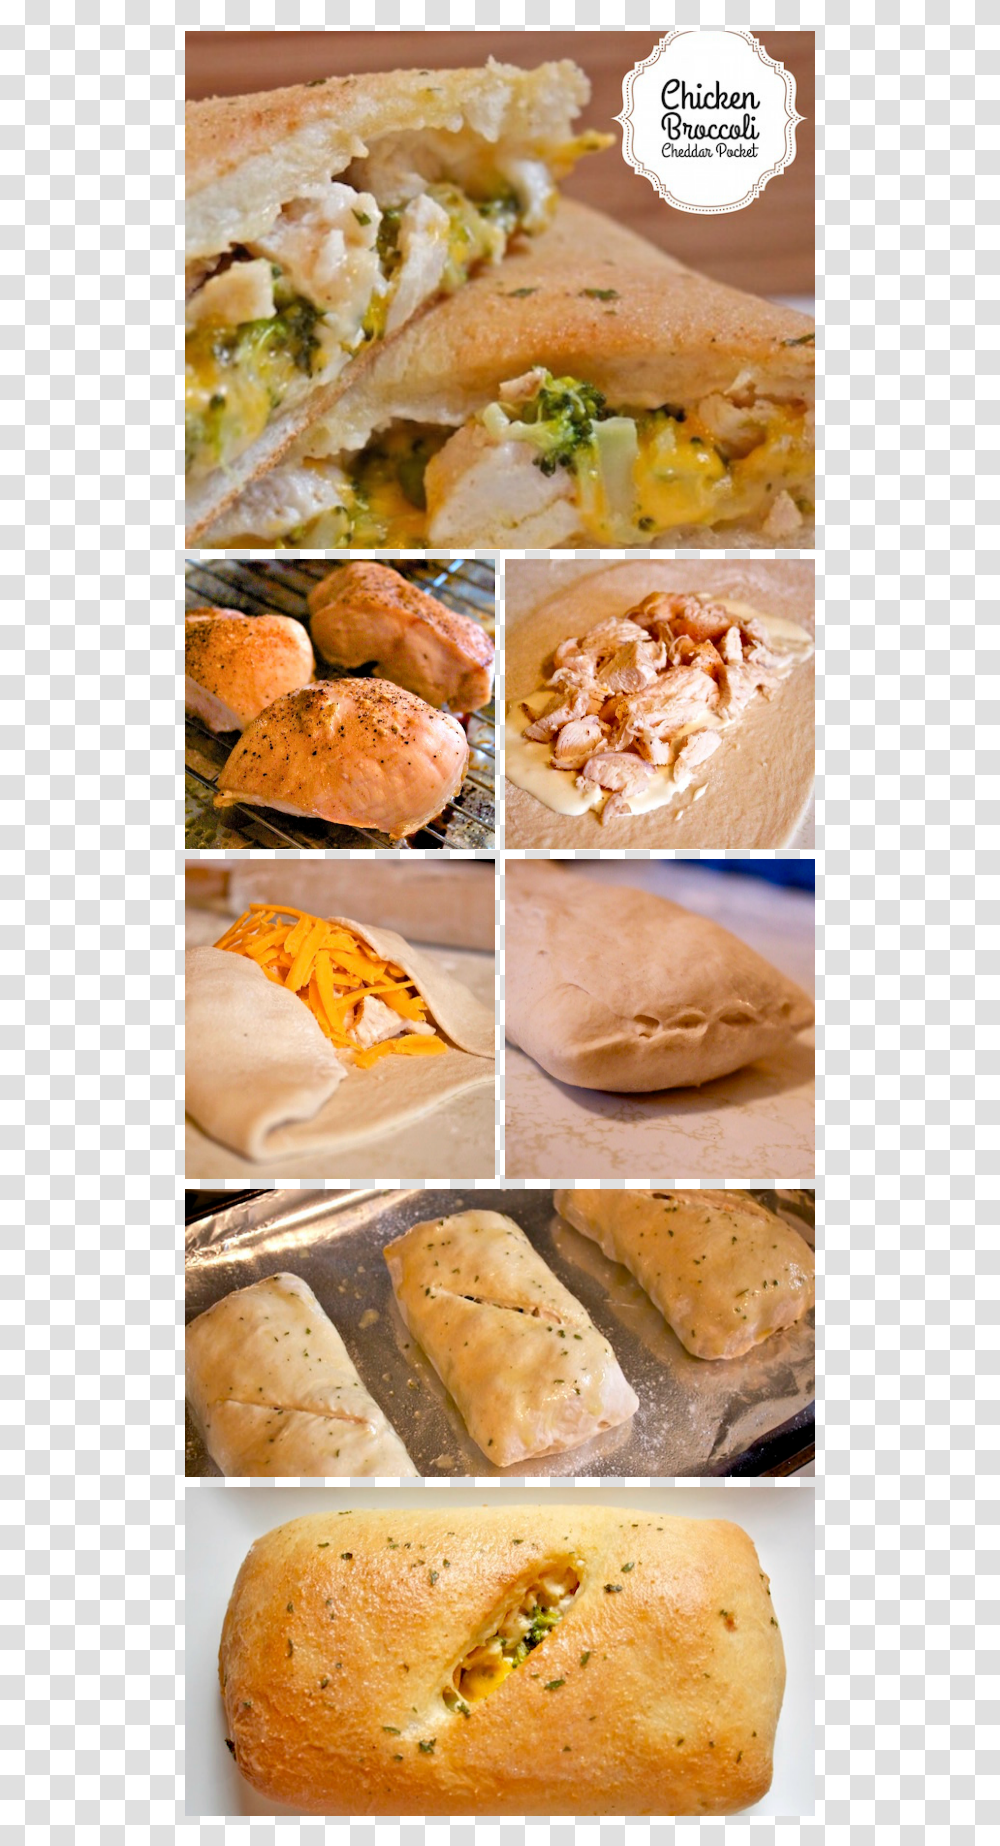 The Chicken Broccoli Cheddar Pocket Is A Homemade Hot Empanada, Bread, Food, Burger, Sweets Transparent Png